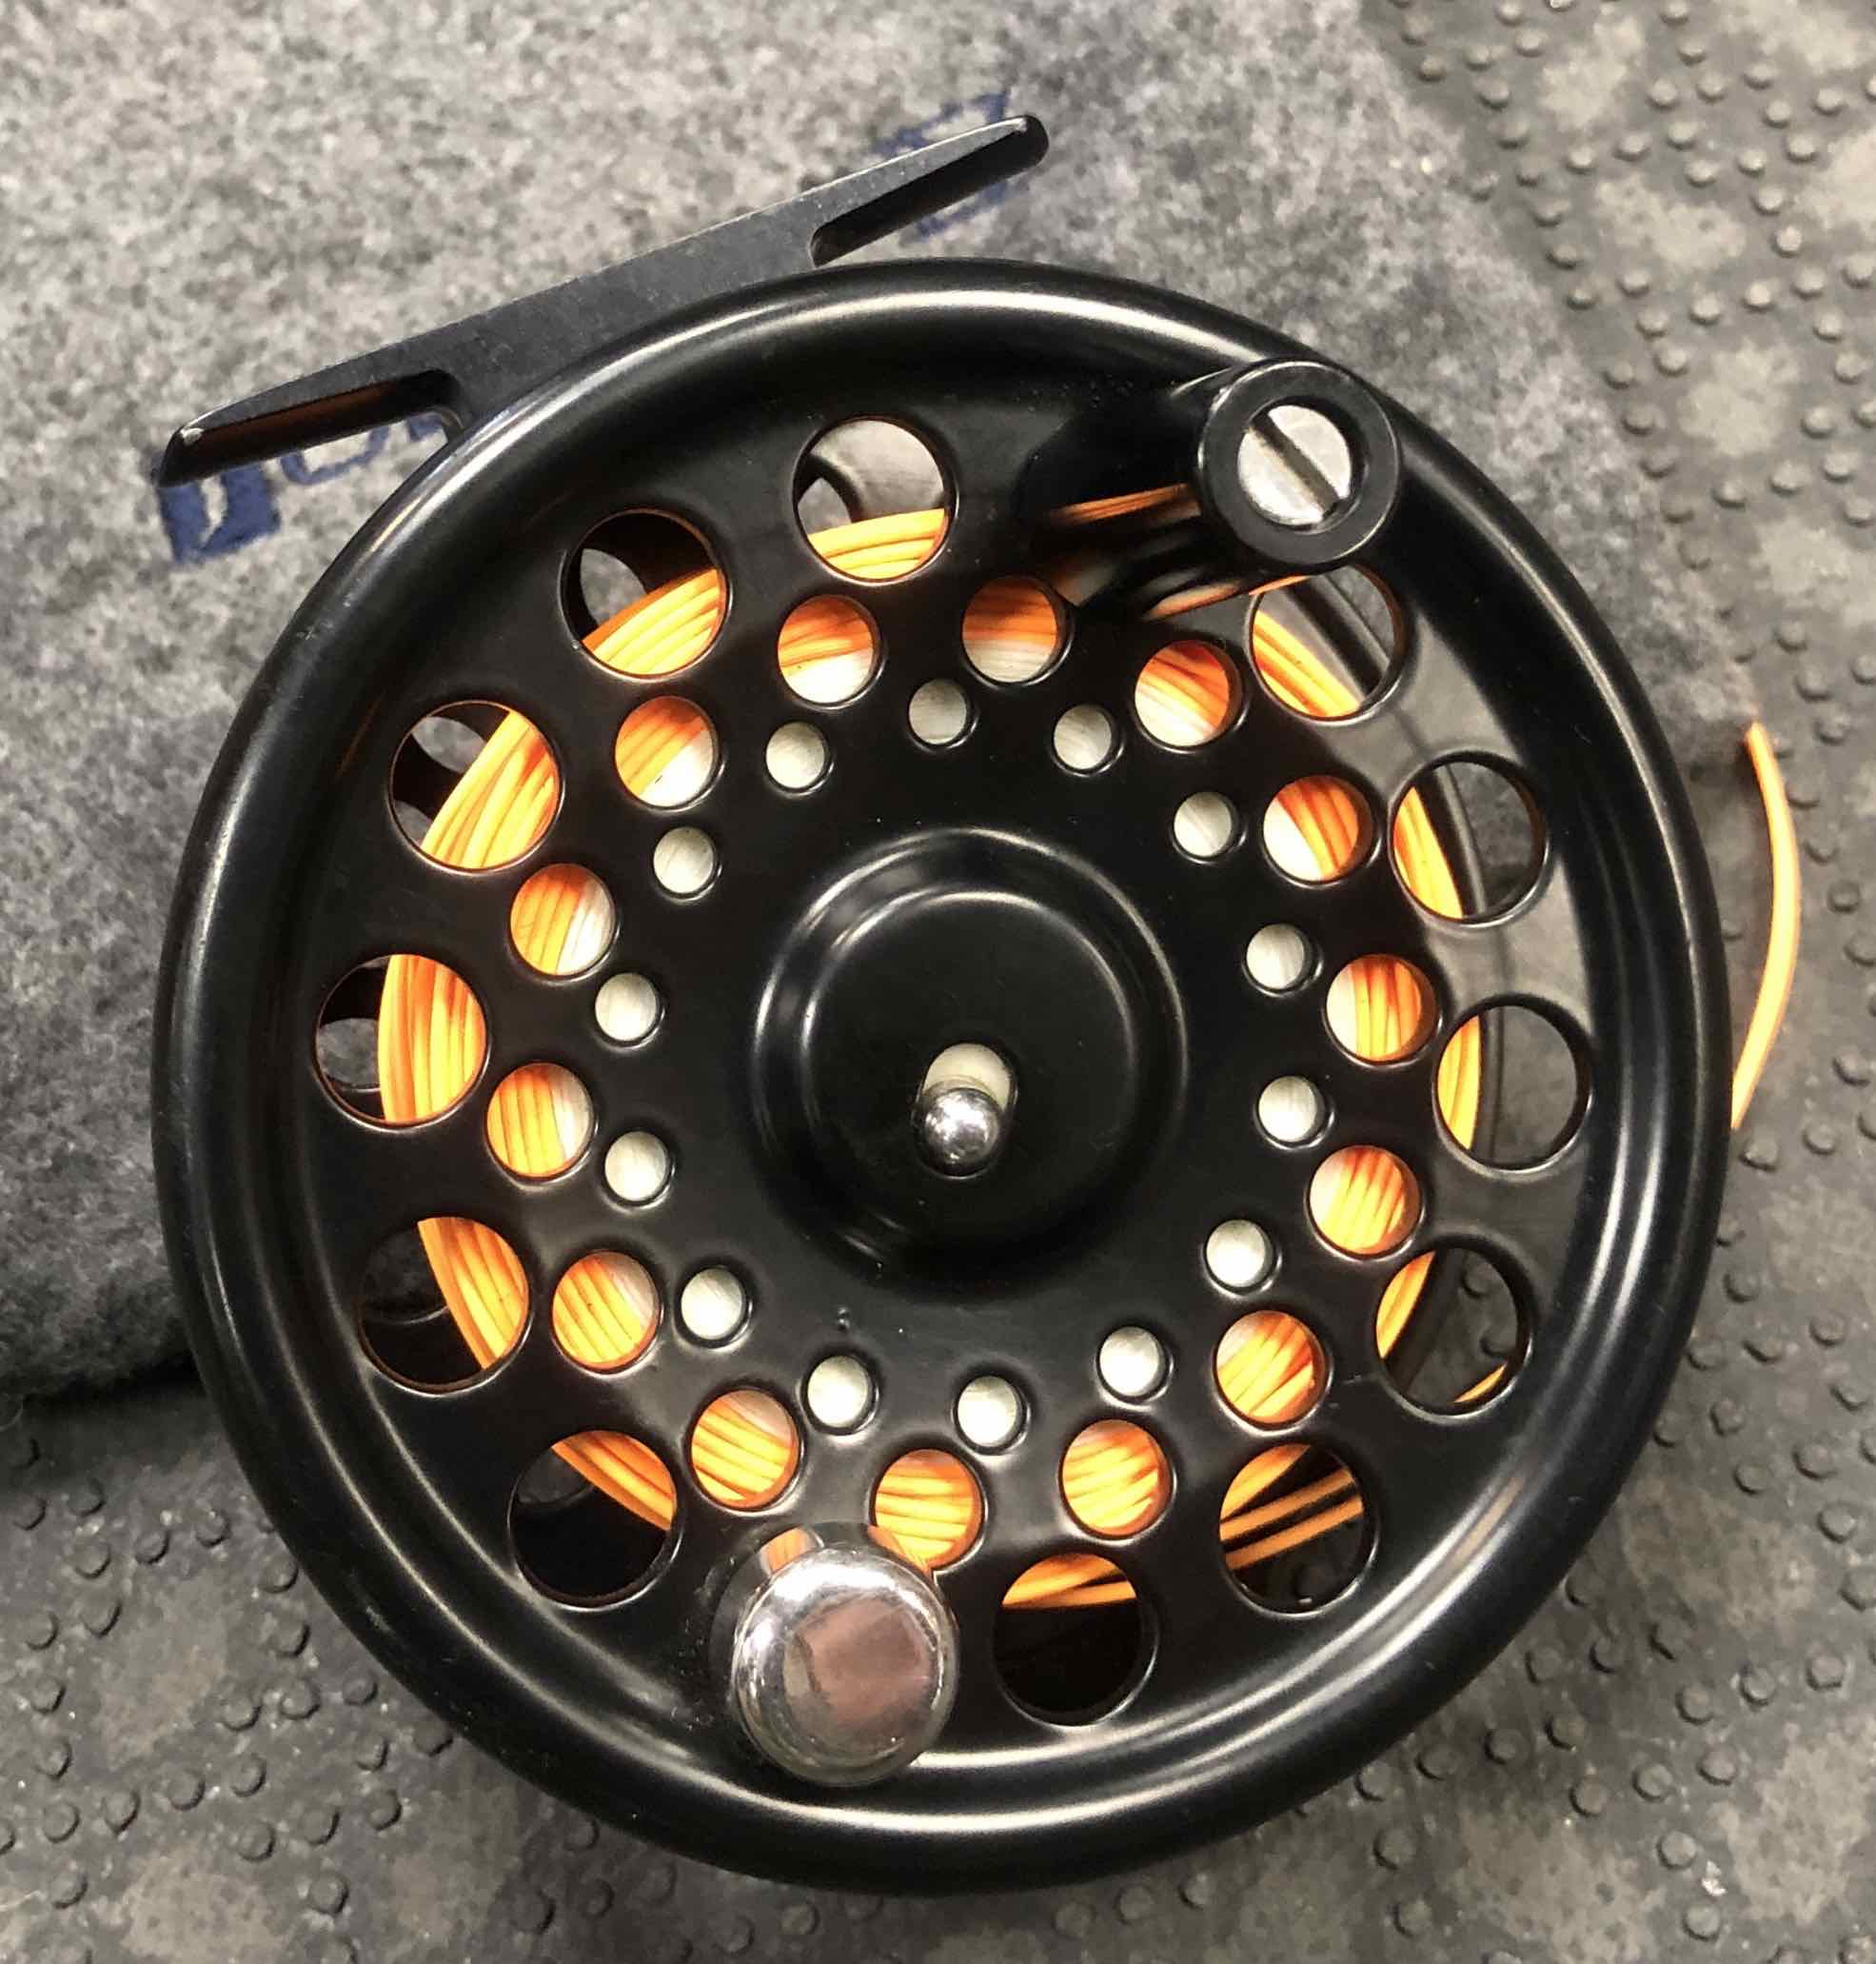 Solitude Harris Reel Company Fly Reel - Made in USA - C/W Fly Line - GREAT SHAPE!